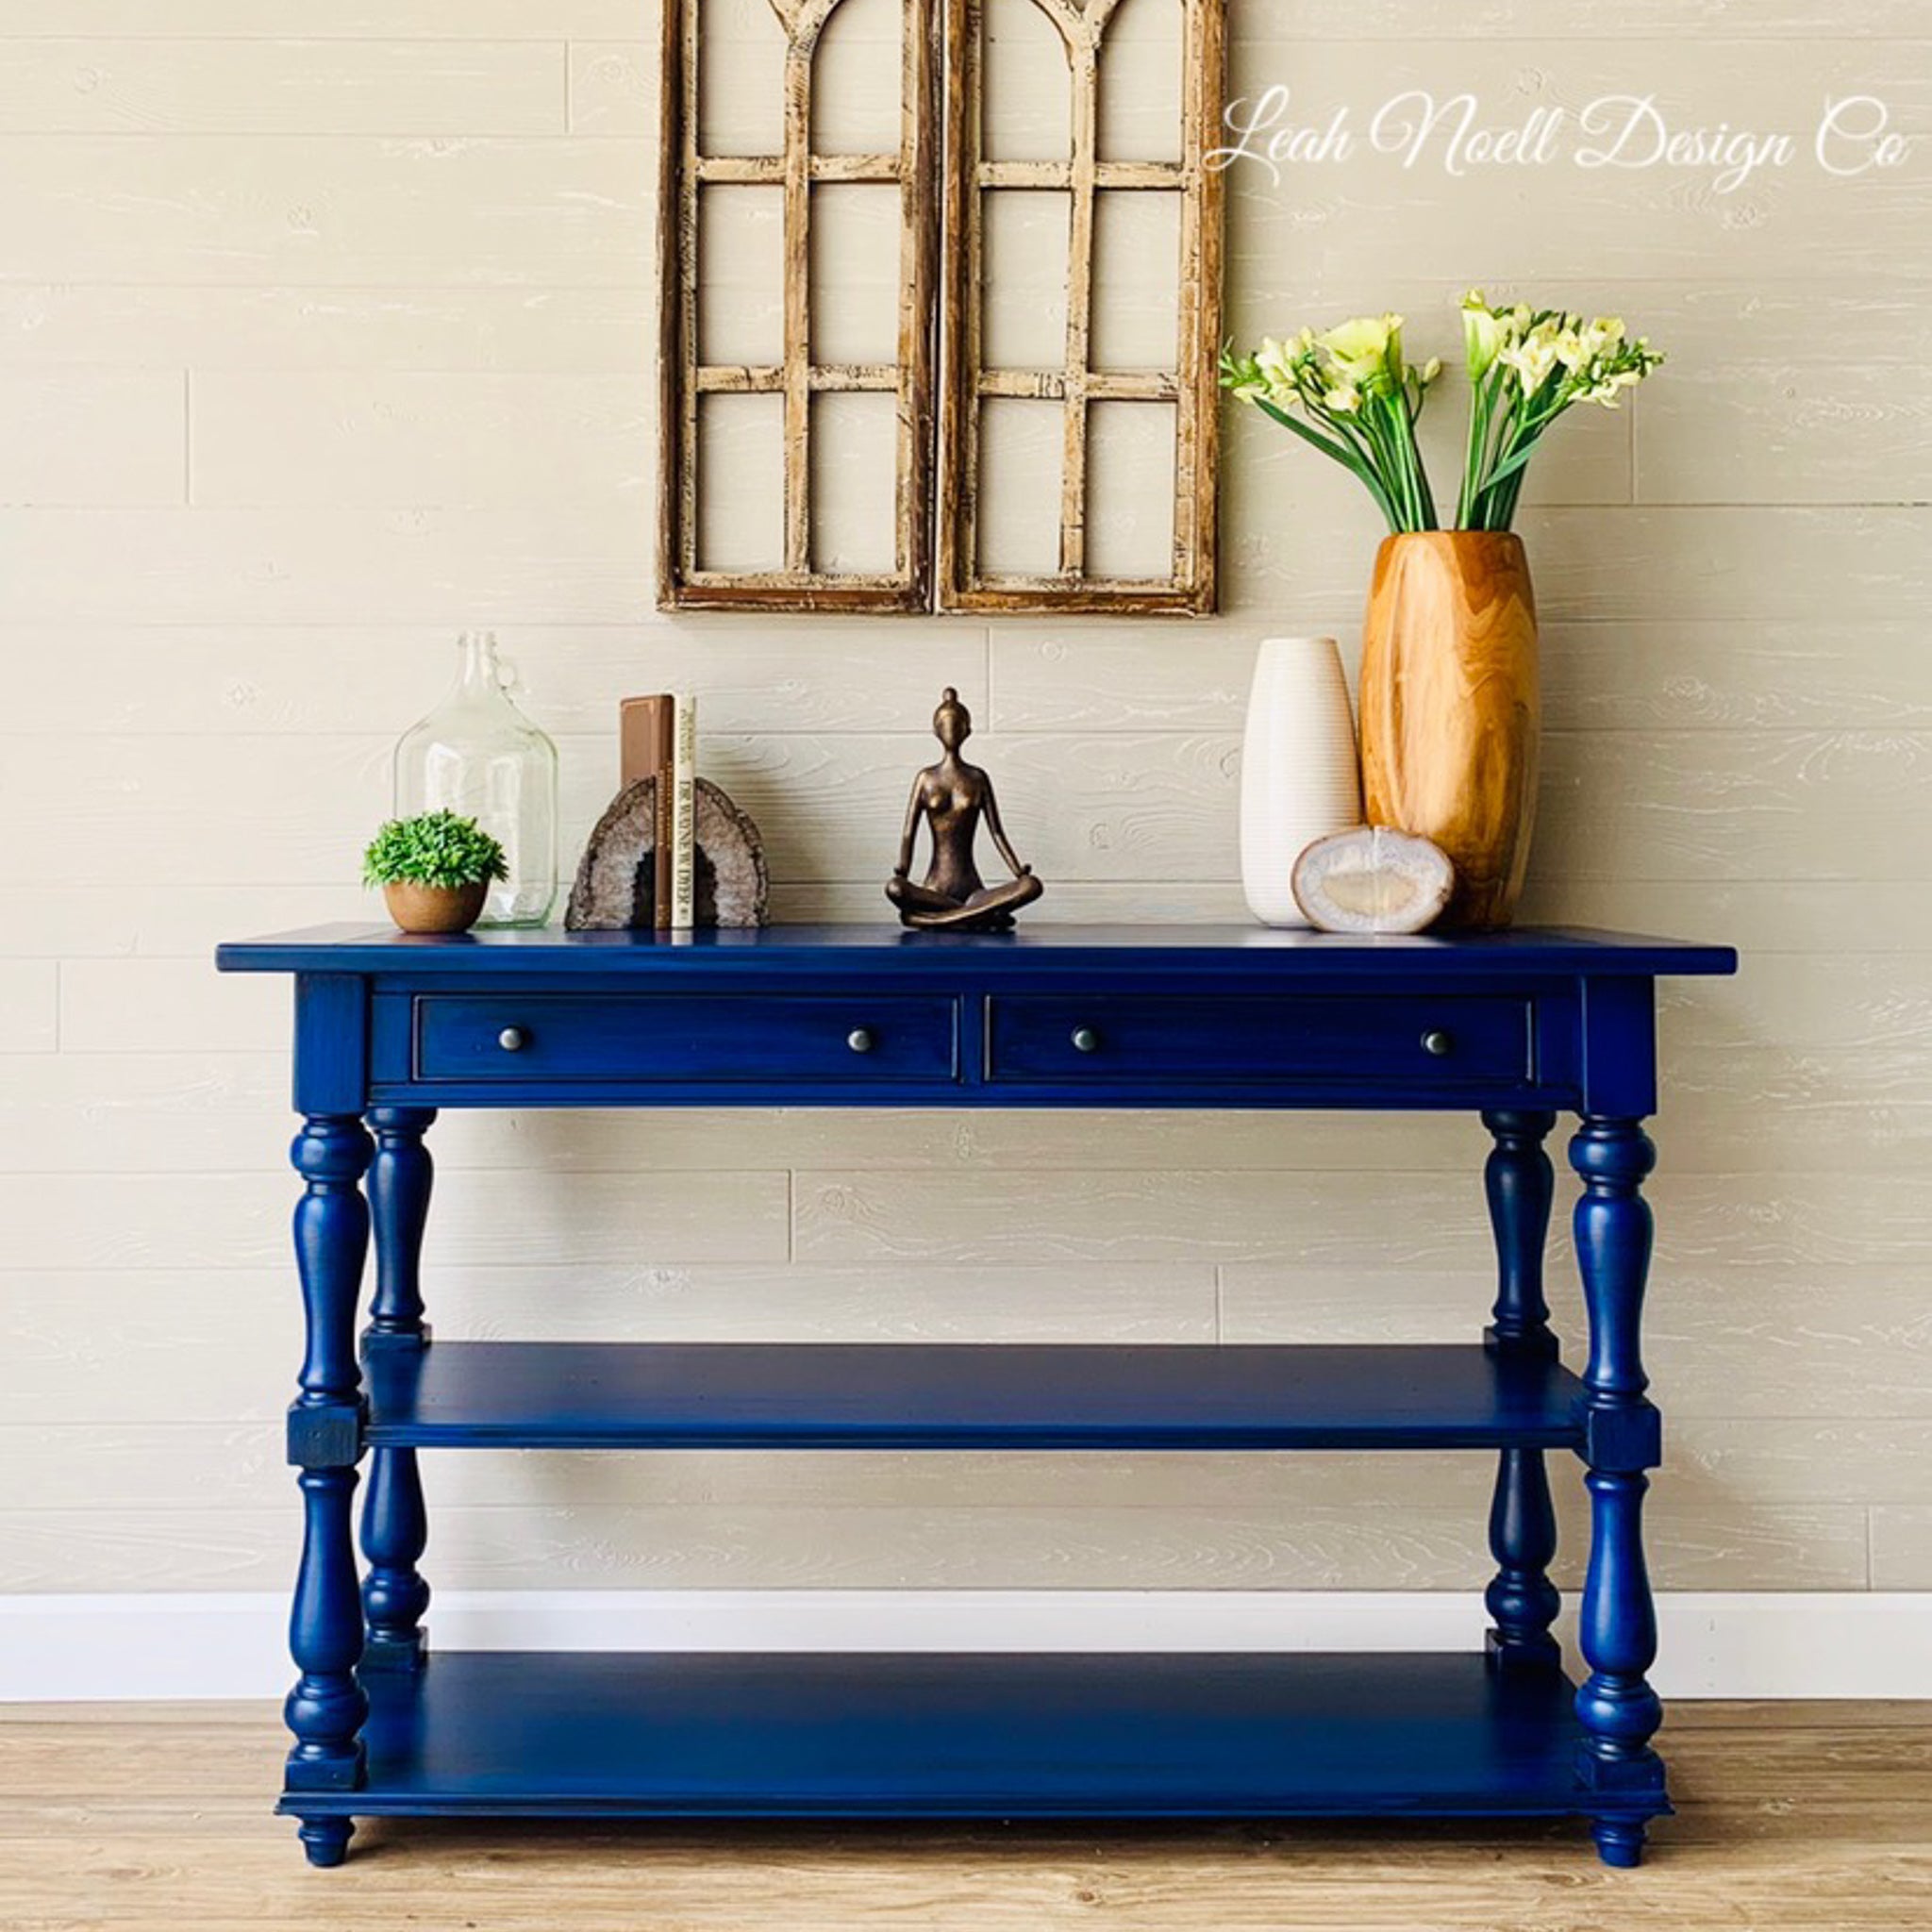 A vintage entryway table refurbished by Leah Noell Design Company is painted with Dixie Belle's Cobalt Blue chalk mineral paint.